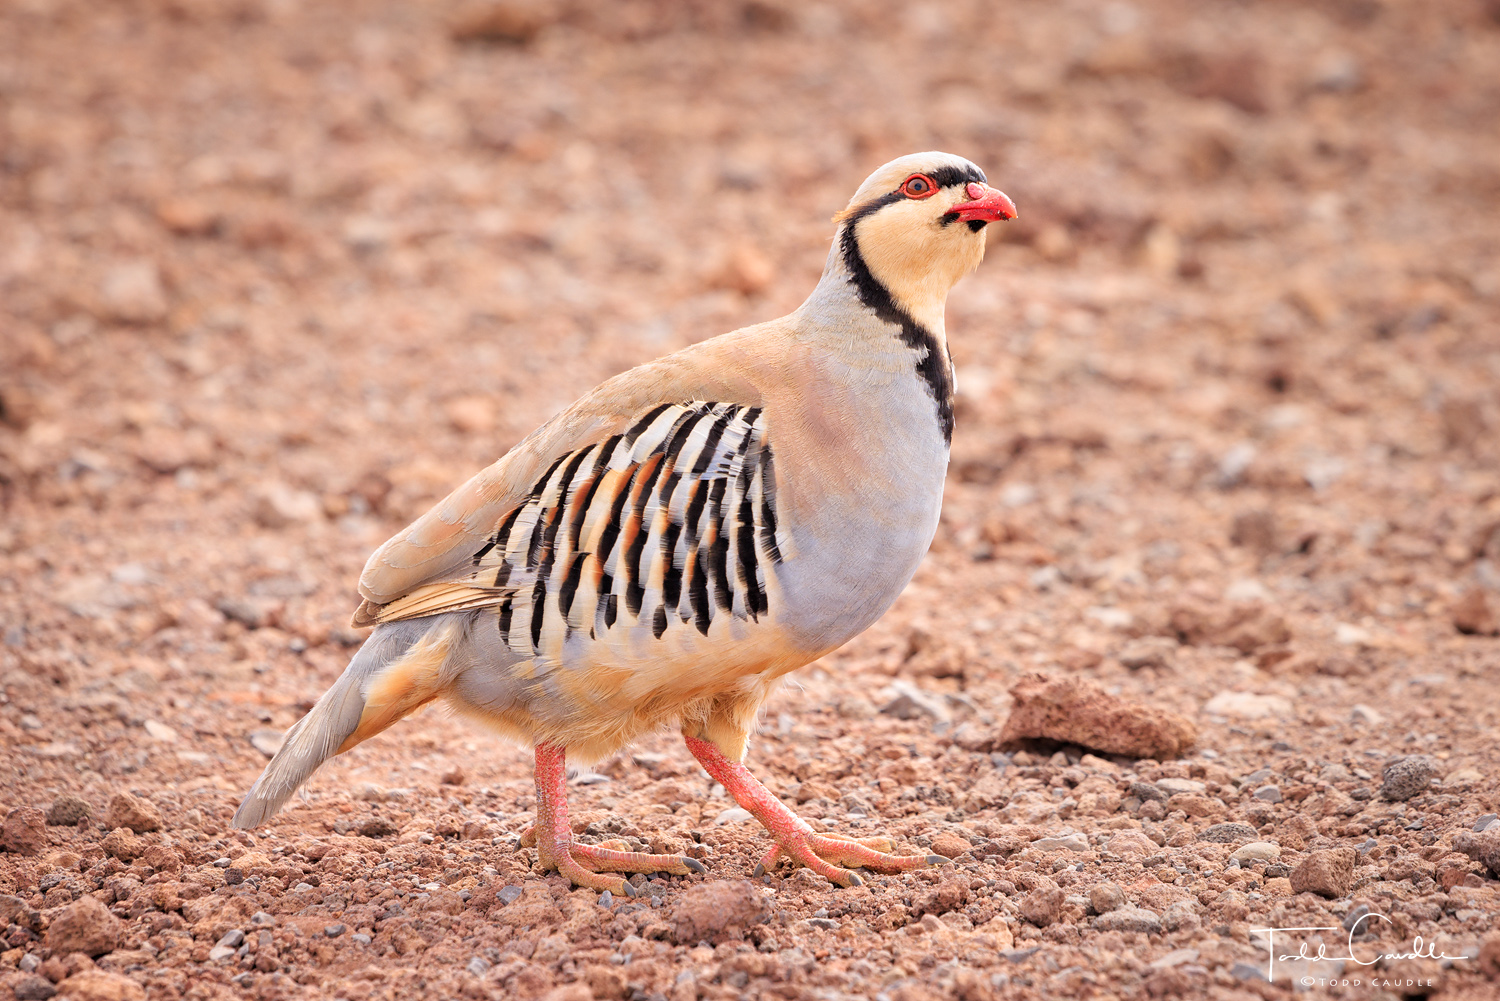 The chukar can be found scurrying all around the summit area of Halaeakala, pecking at the ground in search of food.